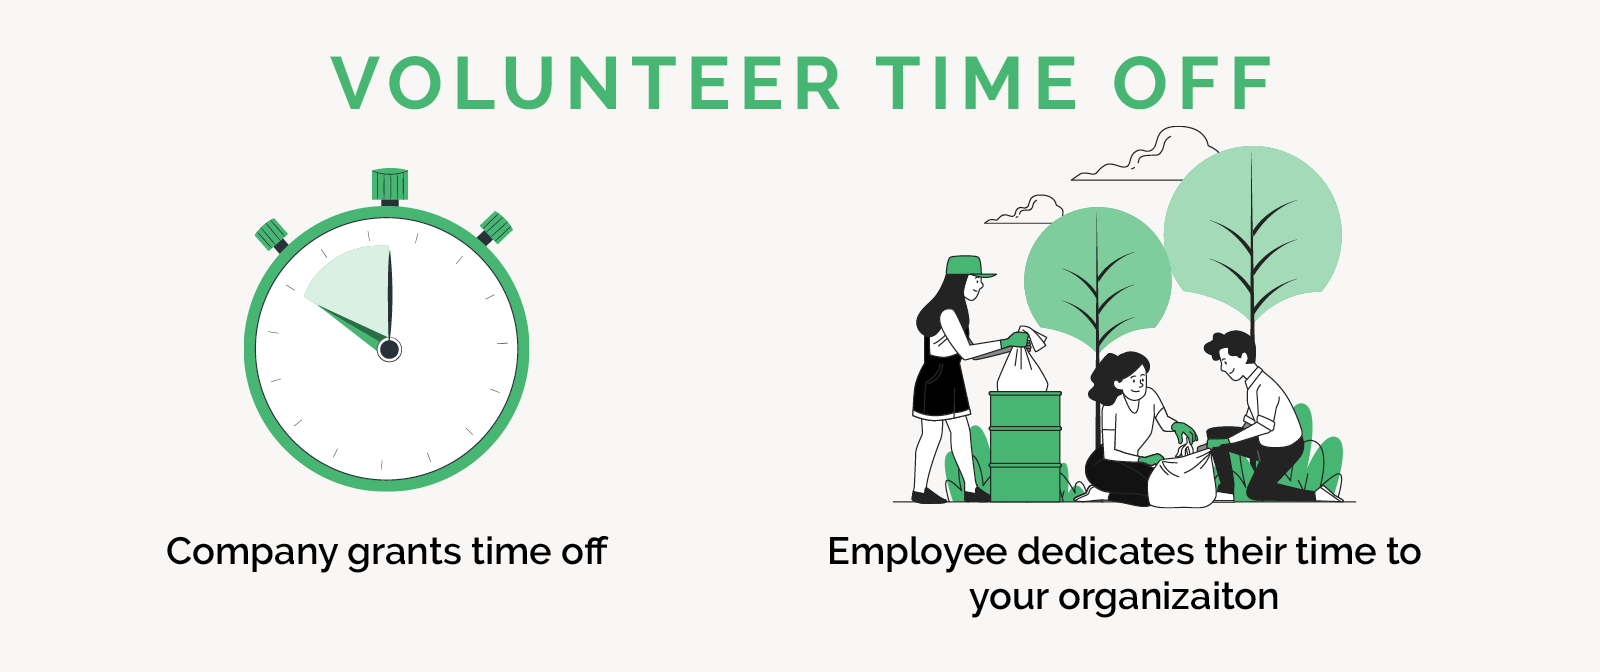 This image explains that volunteer time off programs allow employees to request dedicated time off work for volunteering.